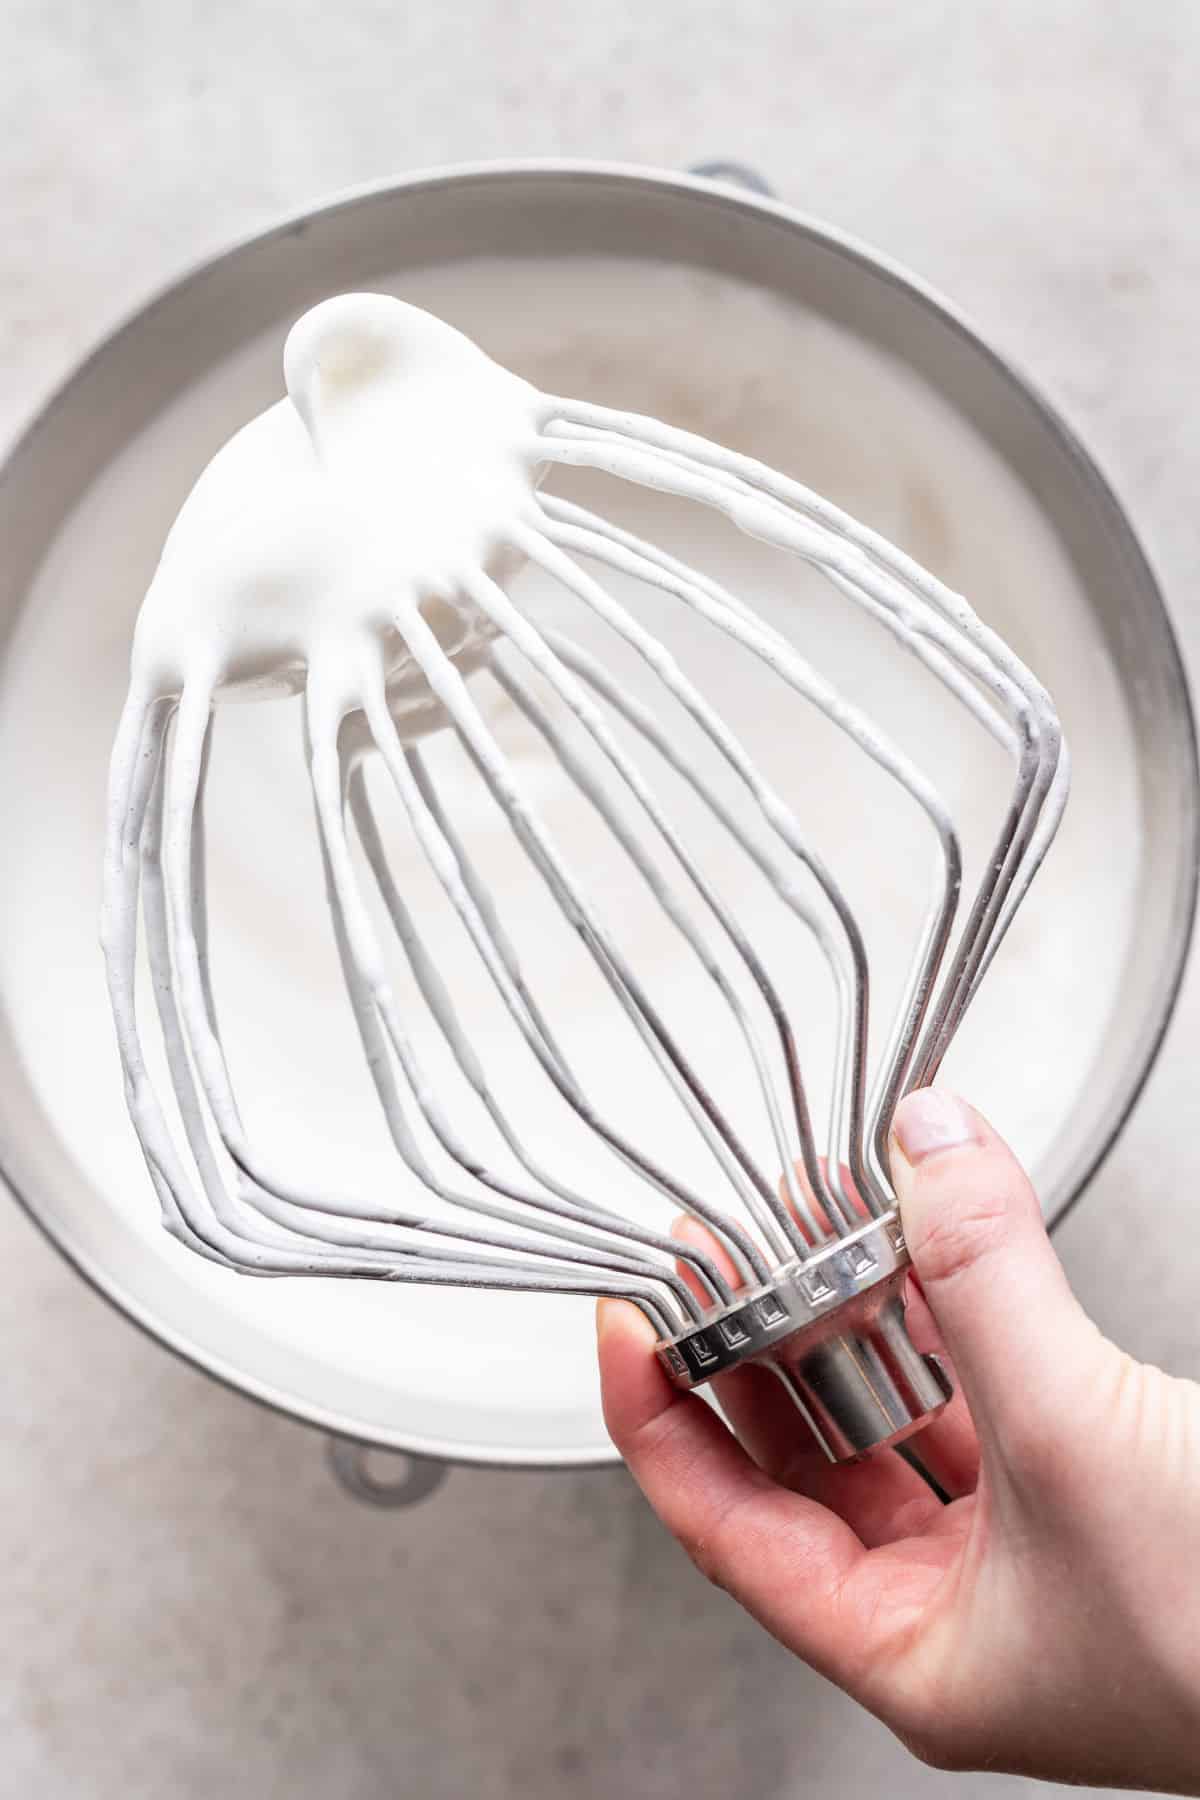 A whisk attachment with beaten egg white drooping over.